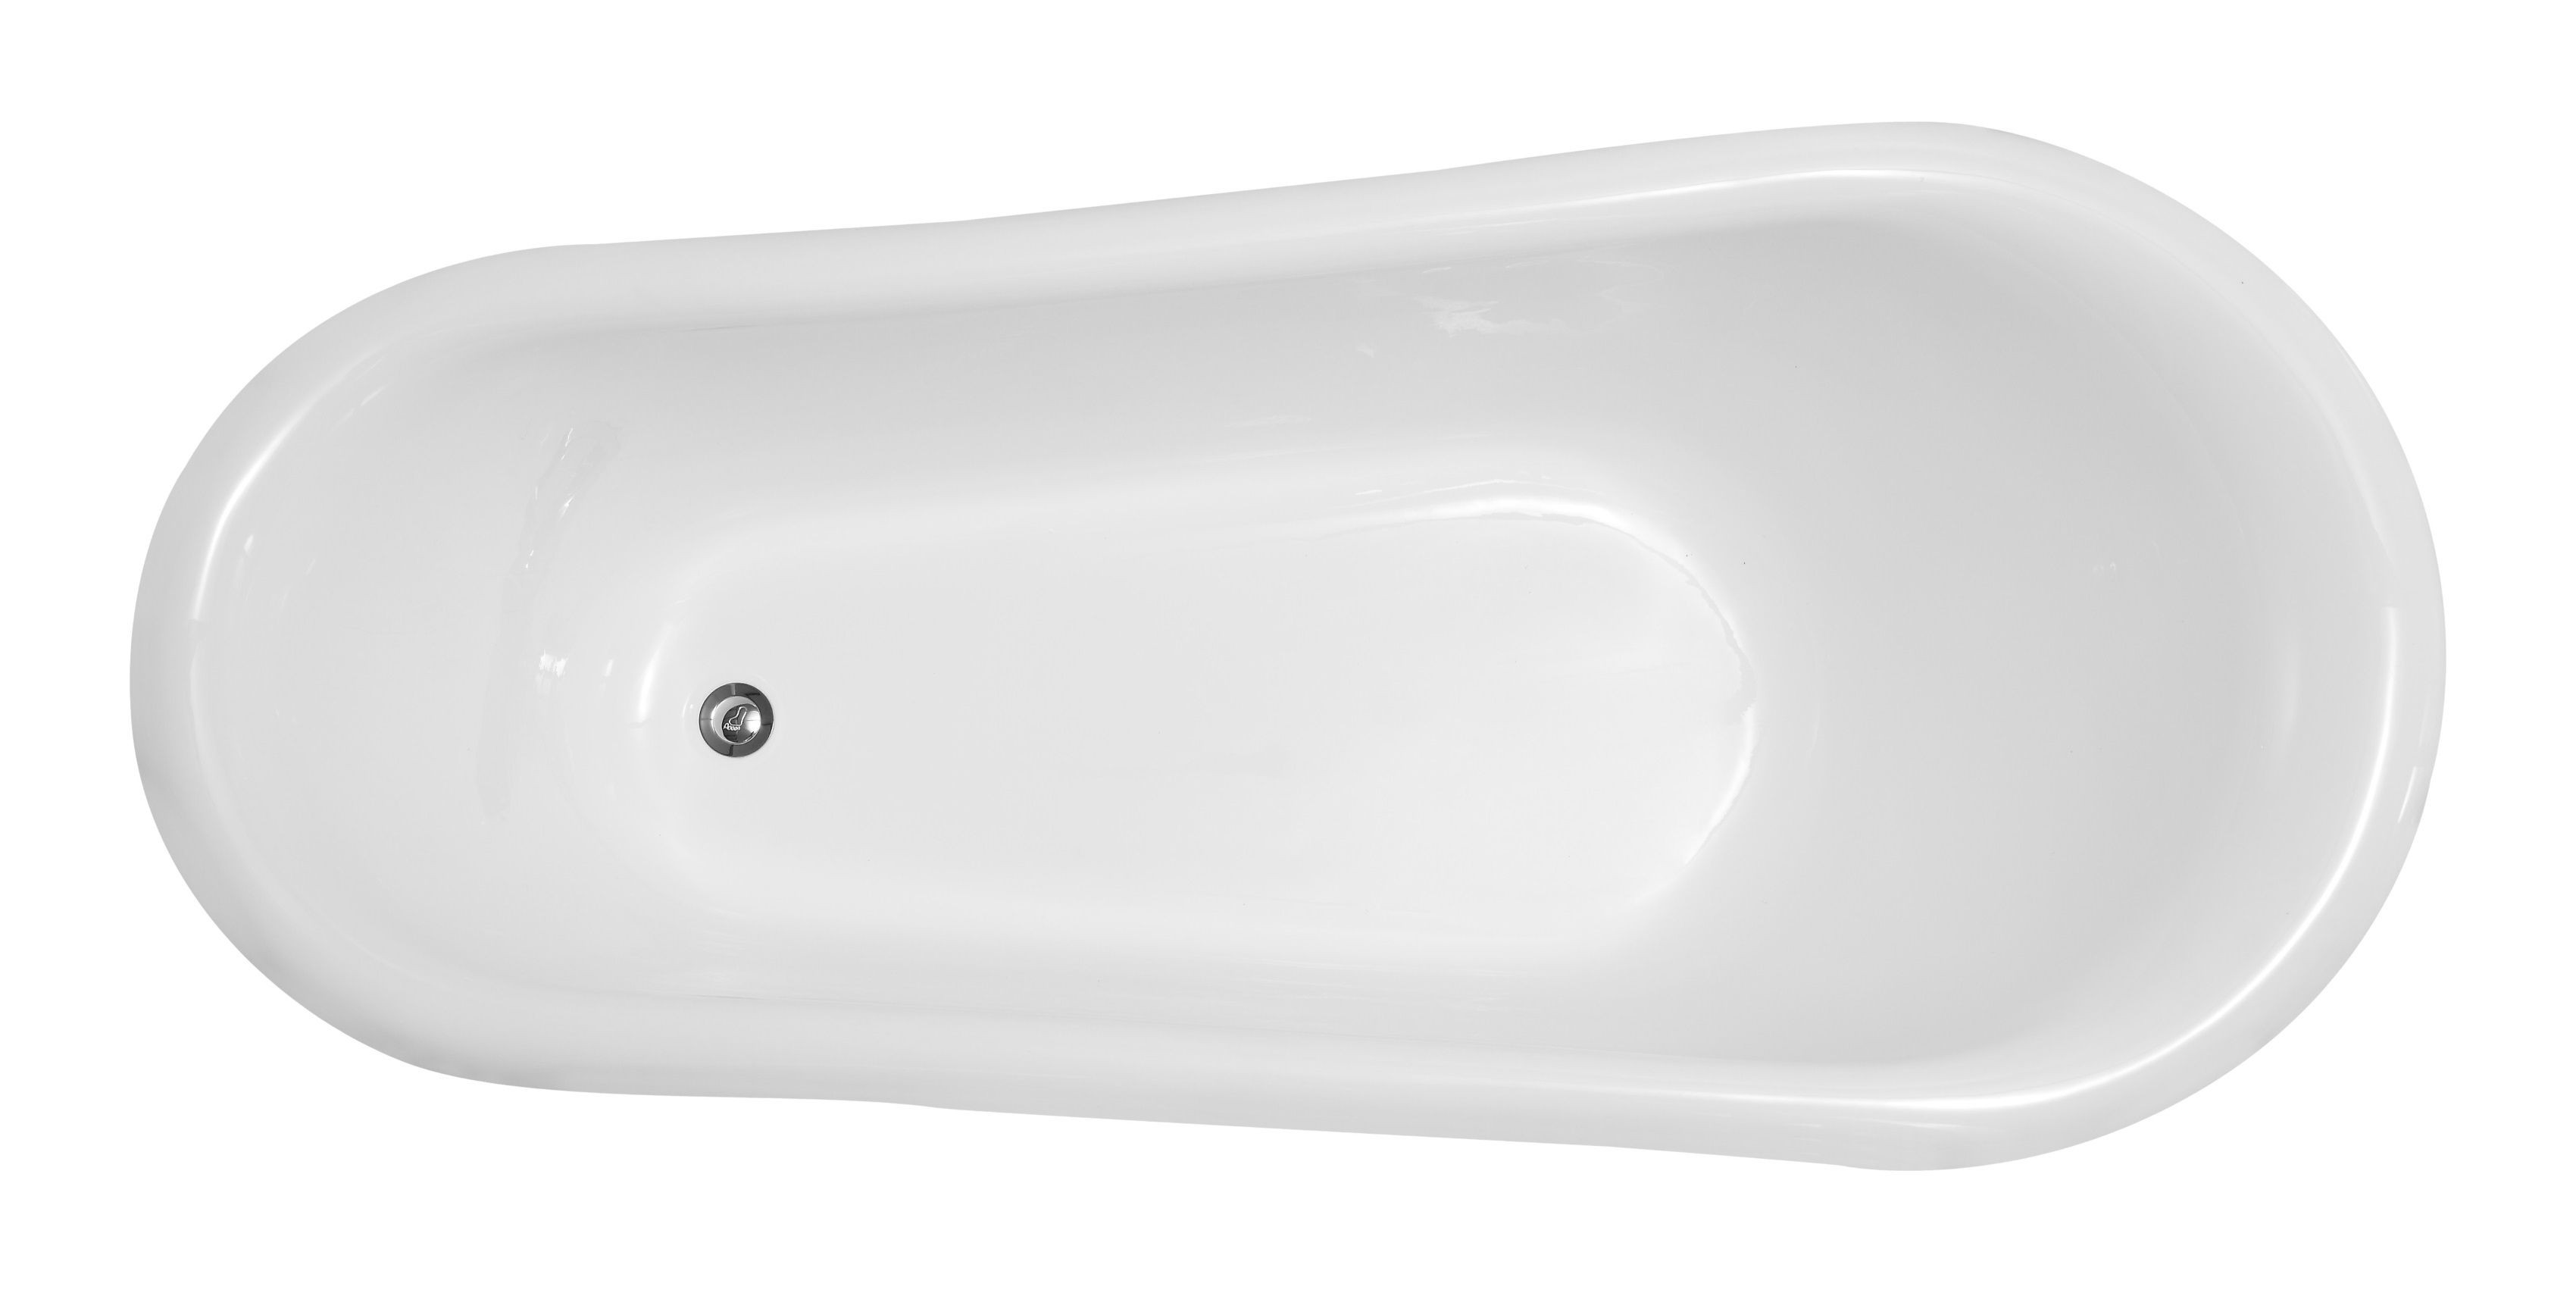 VANITY ART VA6311-RL 66 7/8 INCH FREESTANDING ACRYLIC CLAWFOOT BATHTUB WITH POLISHED CHROME POP-UP DRAIN - RED AND WHITE